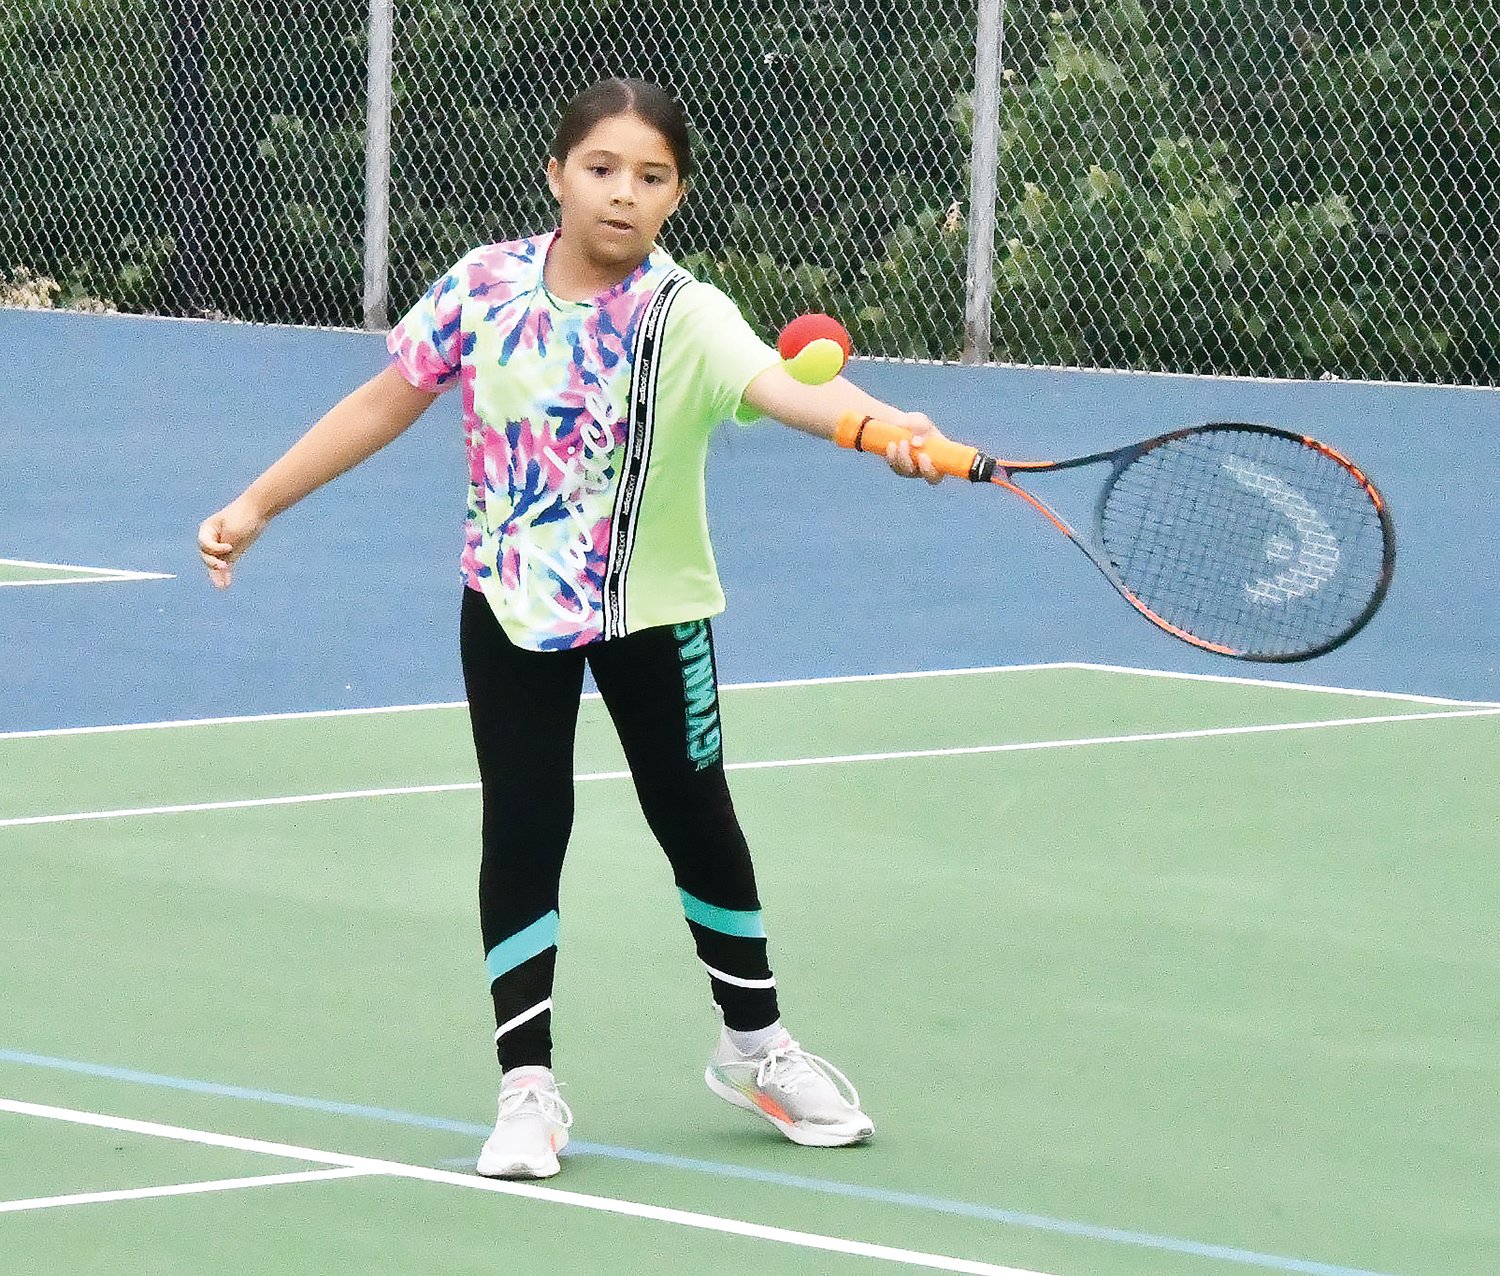 Tabitha Rodriguez uses a forehand stroke during tennis lessons on Friday, June 24, at Shelter One Courts. About one dozen children participated in lessons this June.